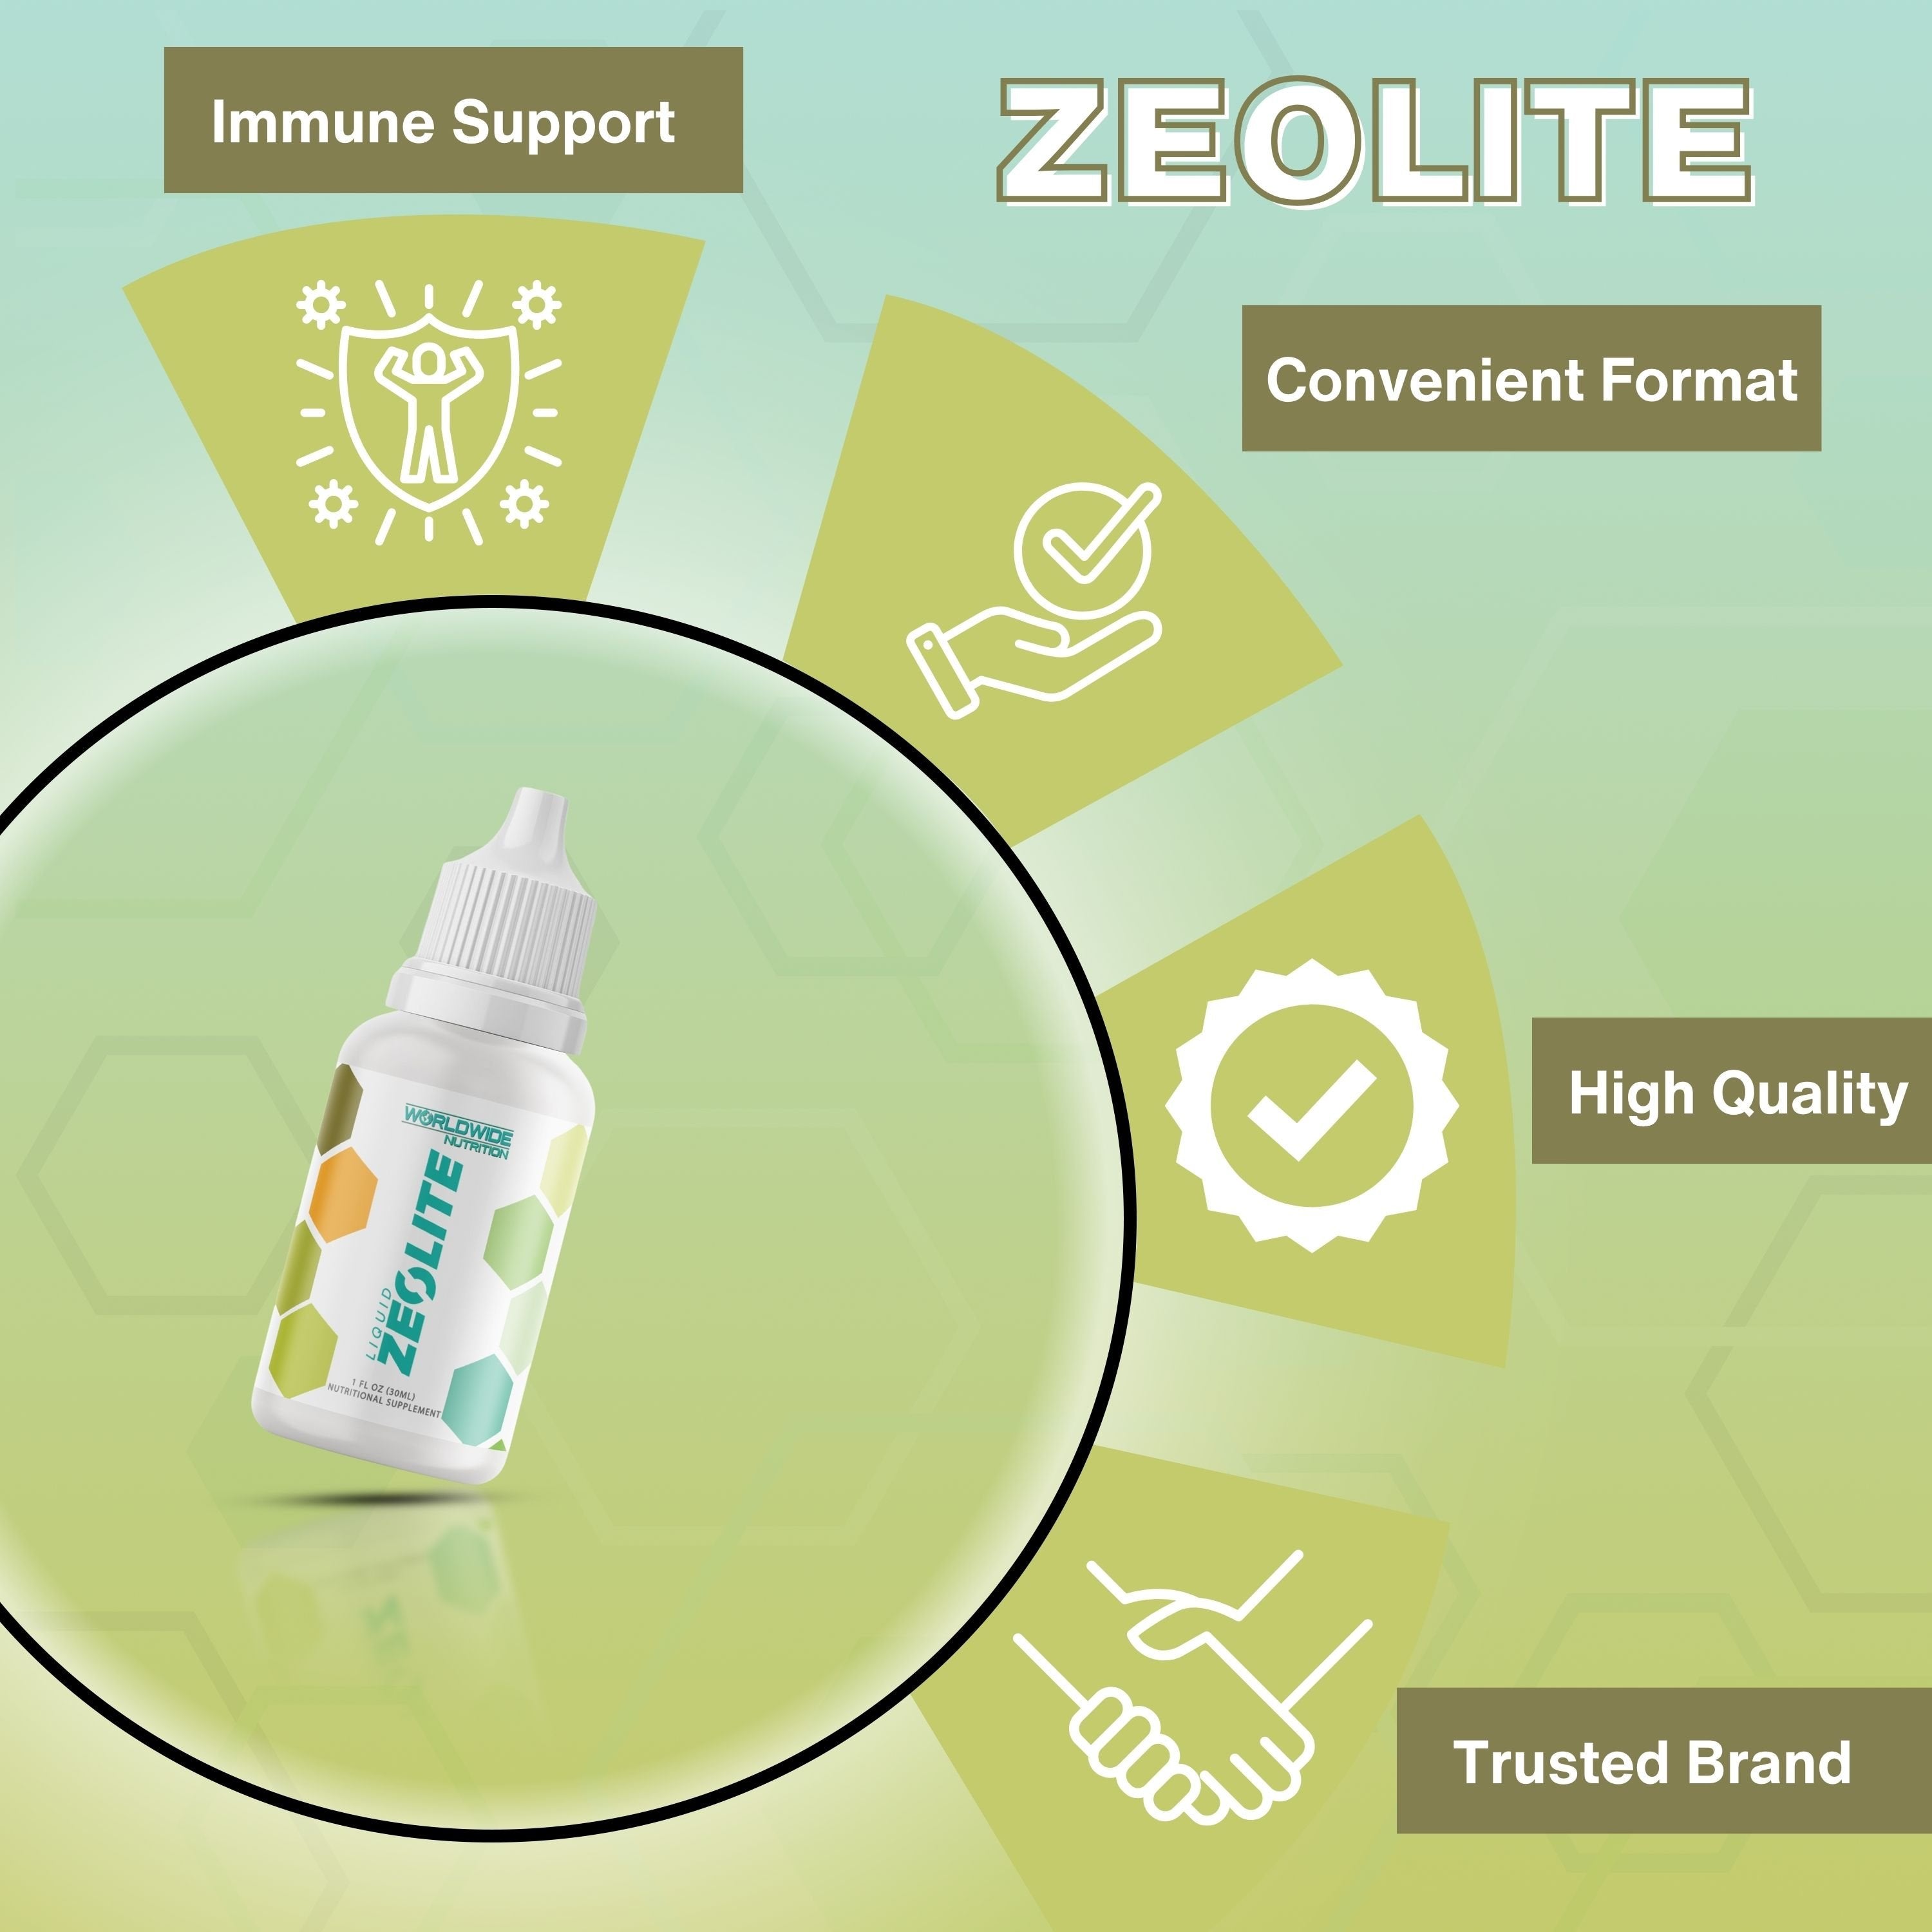 Worldwide Nutrition Liquid Zeolite Drops - Detox and Cleanse Your Immune System - 1 fl oz